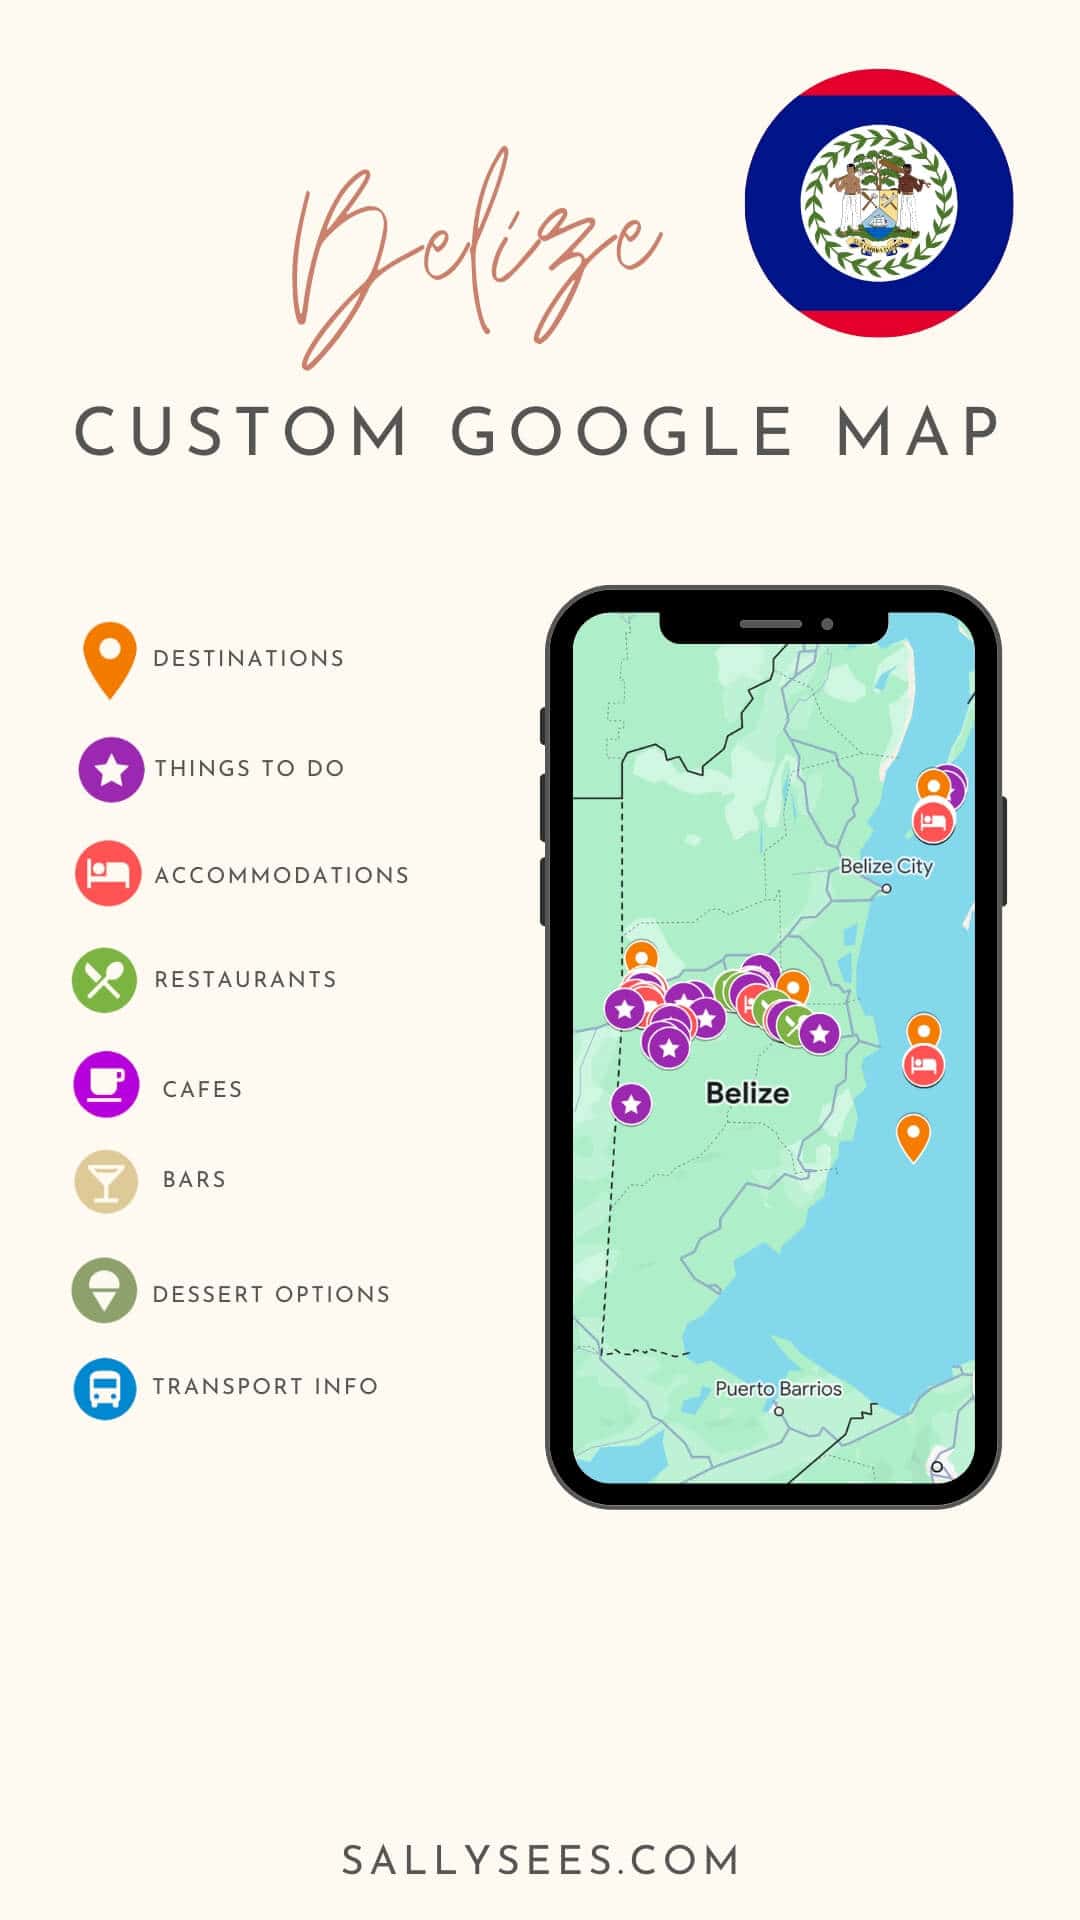 A Canva graphic promoting a Belize custom Google Map, with an icon of an iPhone with the map featured on the screen, a list of location types pinned next to colourful icons (e.g. restaurants, destinations etc.) with the heading 'Belize Custom Google Map' and and a circle graphic of the Belize flag.